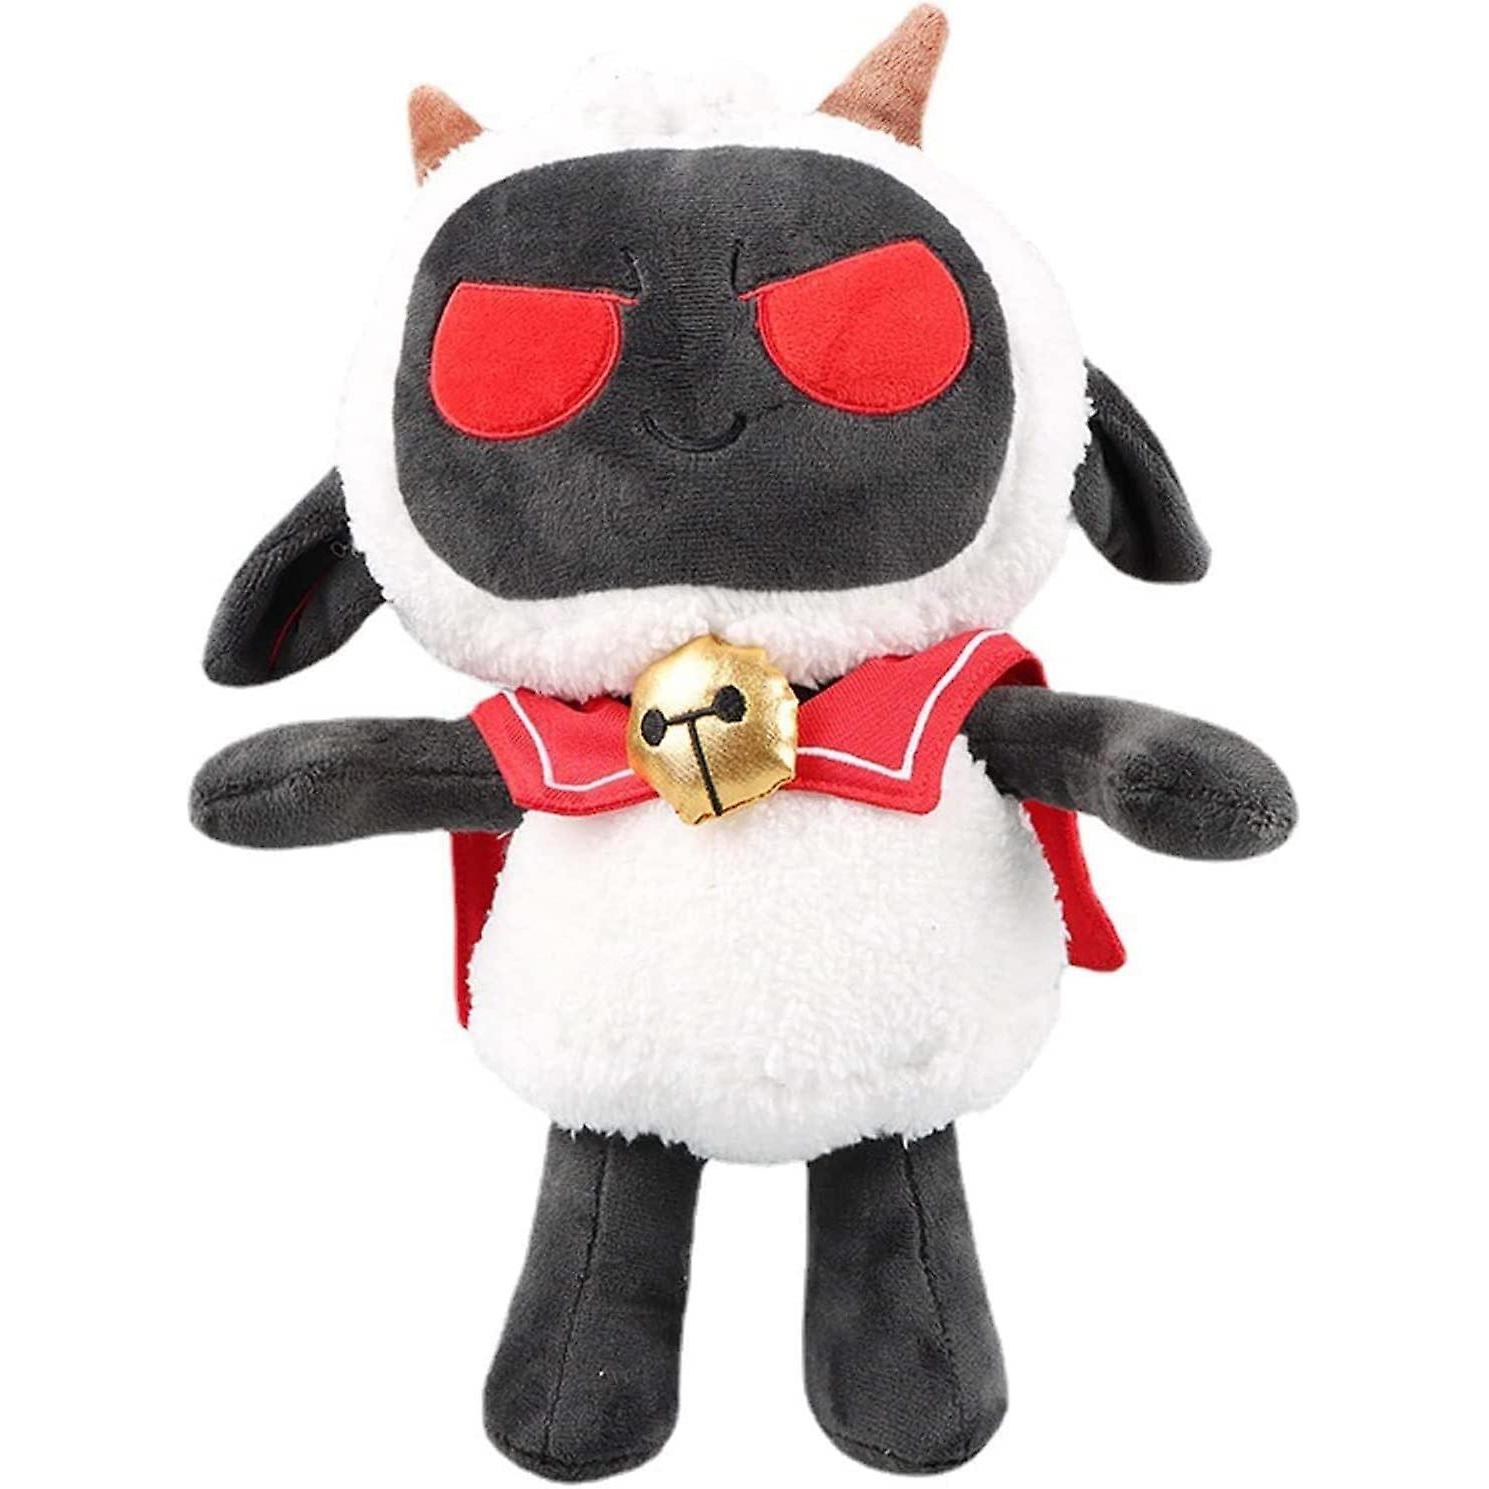 Emotional Support Demon Plush,cut Kawaii The Click Plushies Toy